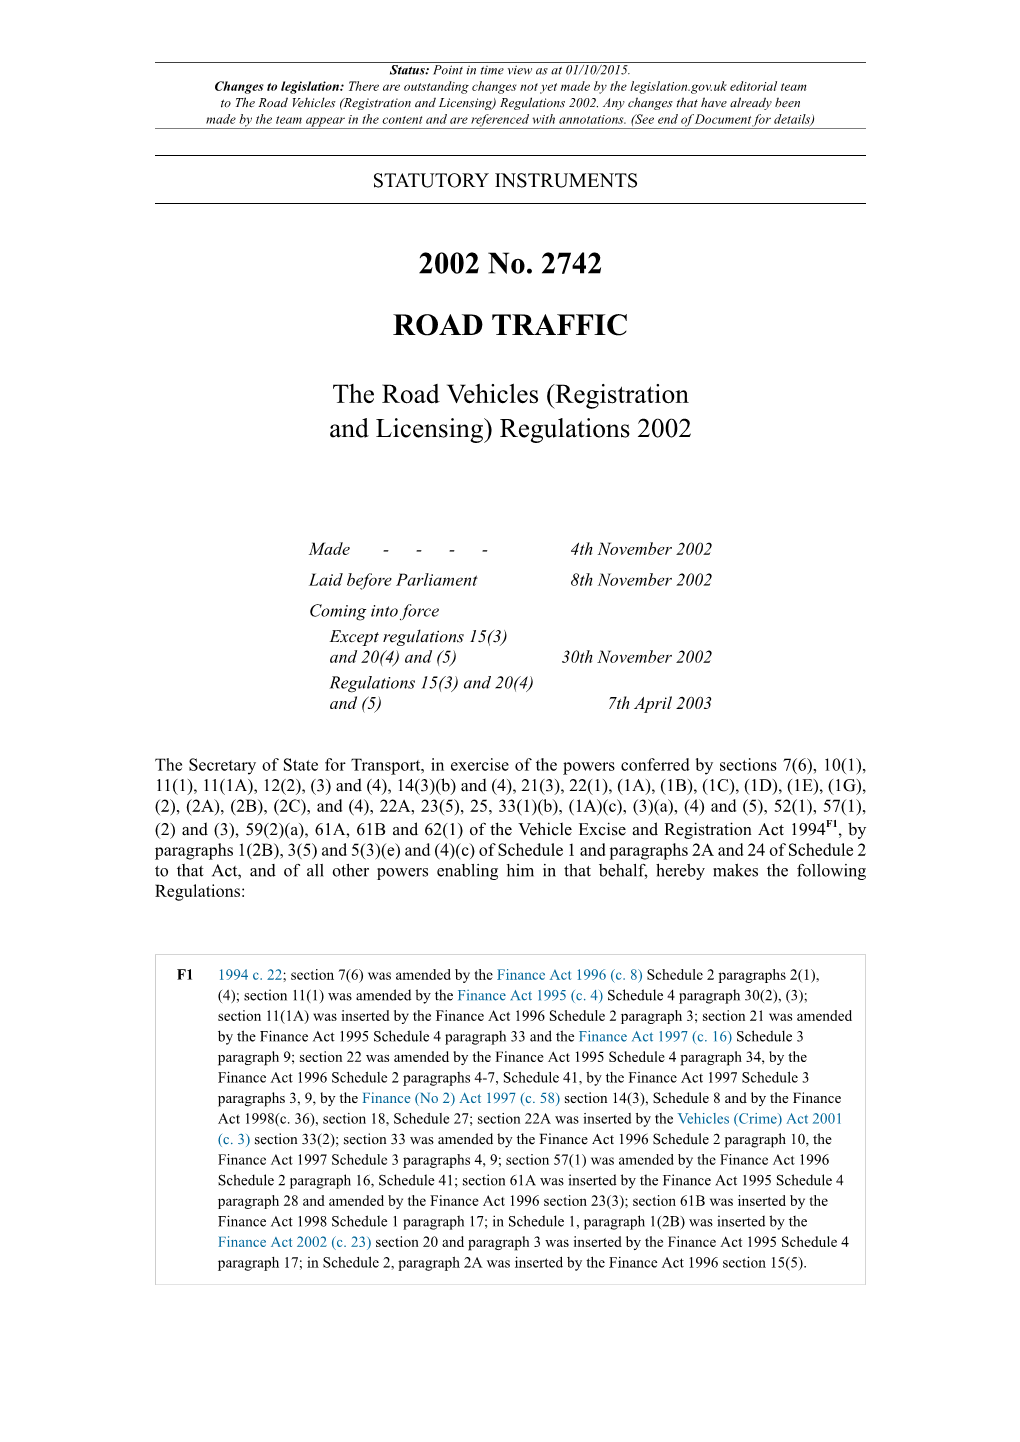 The Road Vehicles (Registration and Licensing) Regulations 2002